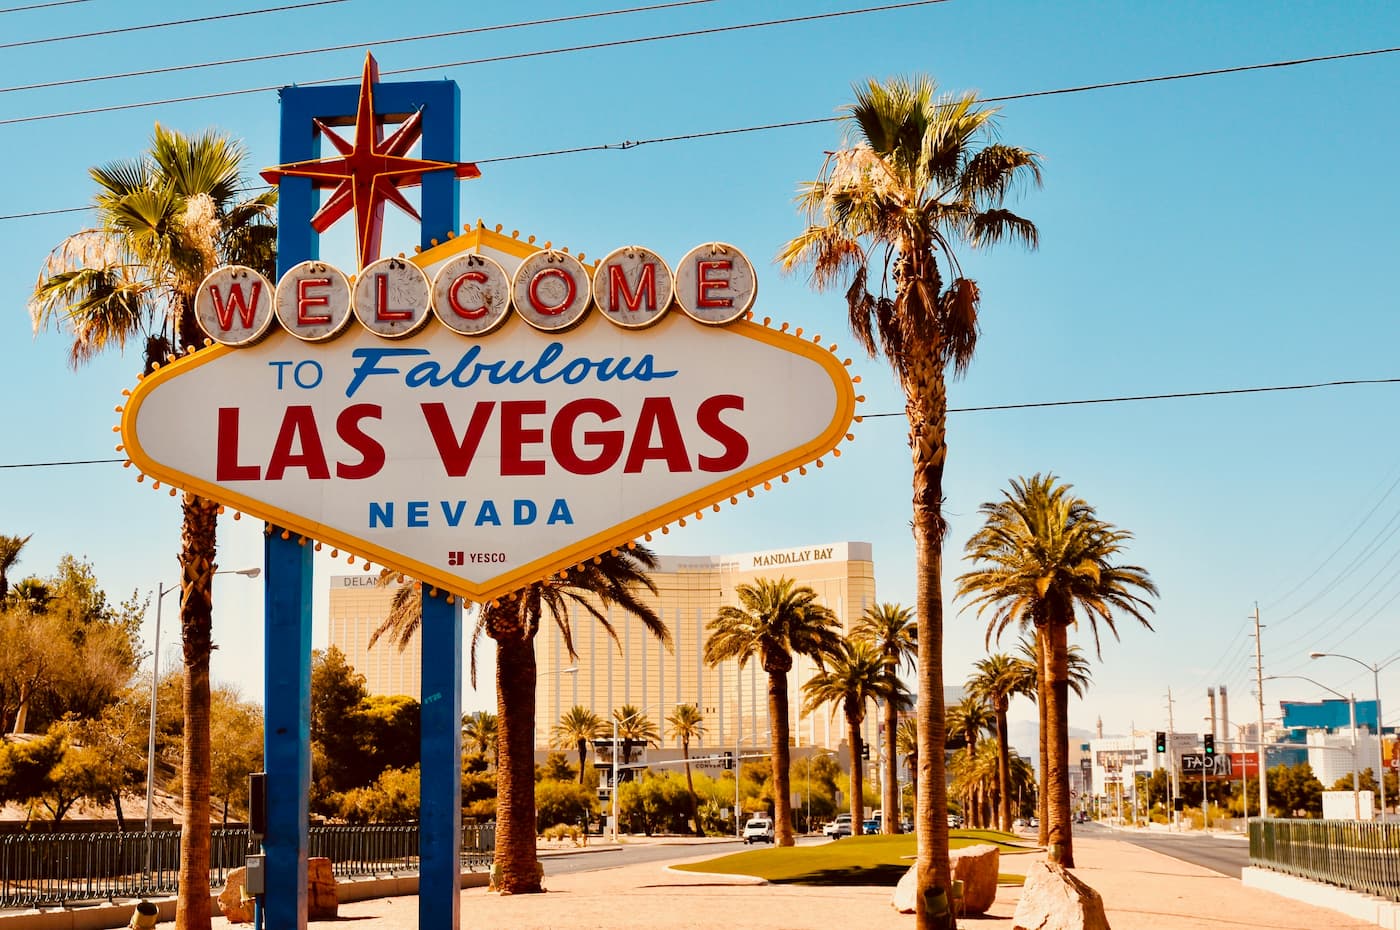 Here's what buyers need to know about Las Vegas investment properties, including the best place to buy a house in Las Vegas as well as the city's amenities. Image shows a sign saying "Welcome to fabulous Las Vegas, Nevada."